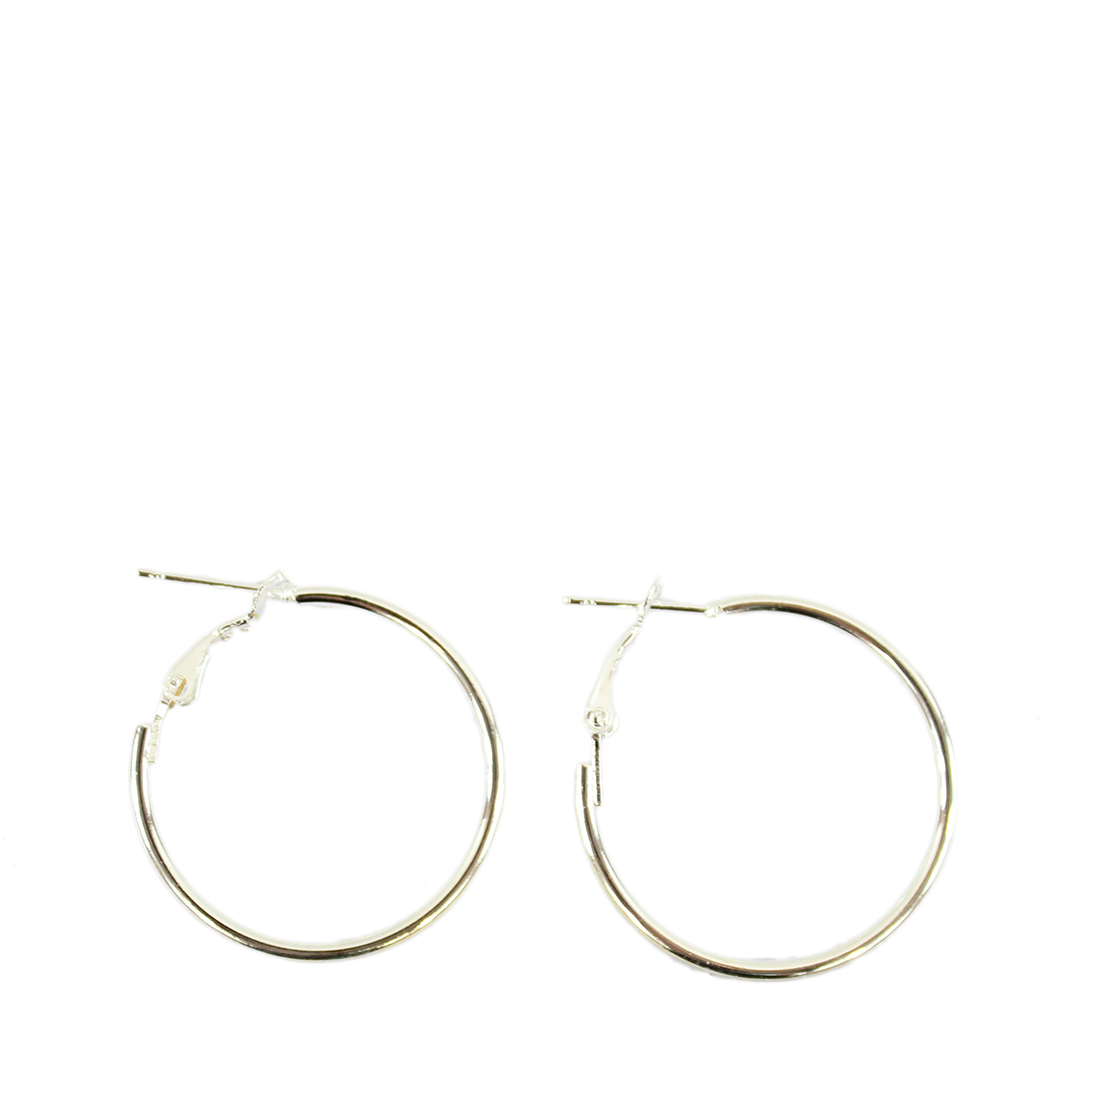 Small size hoops